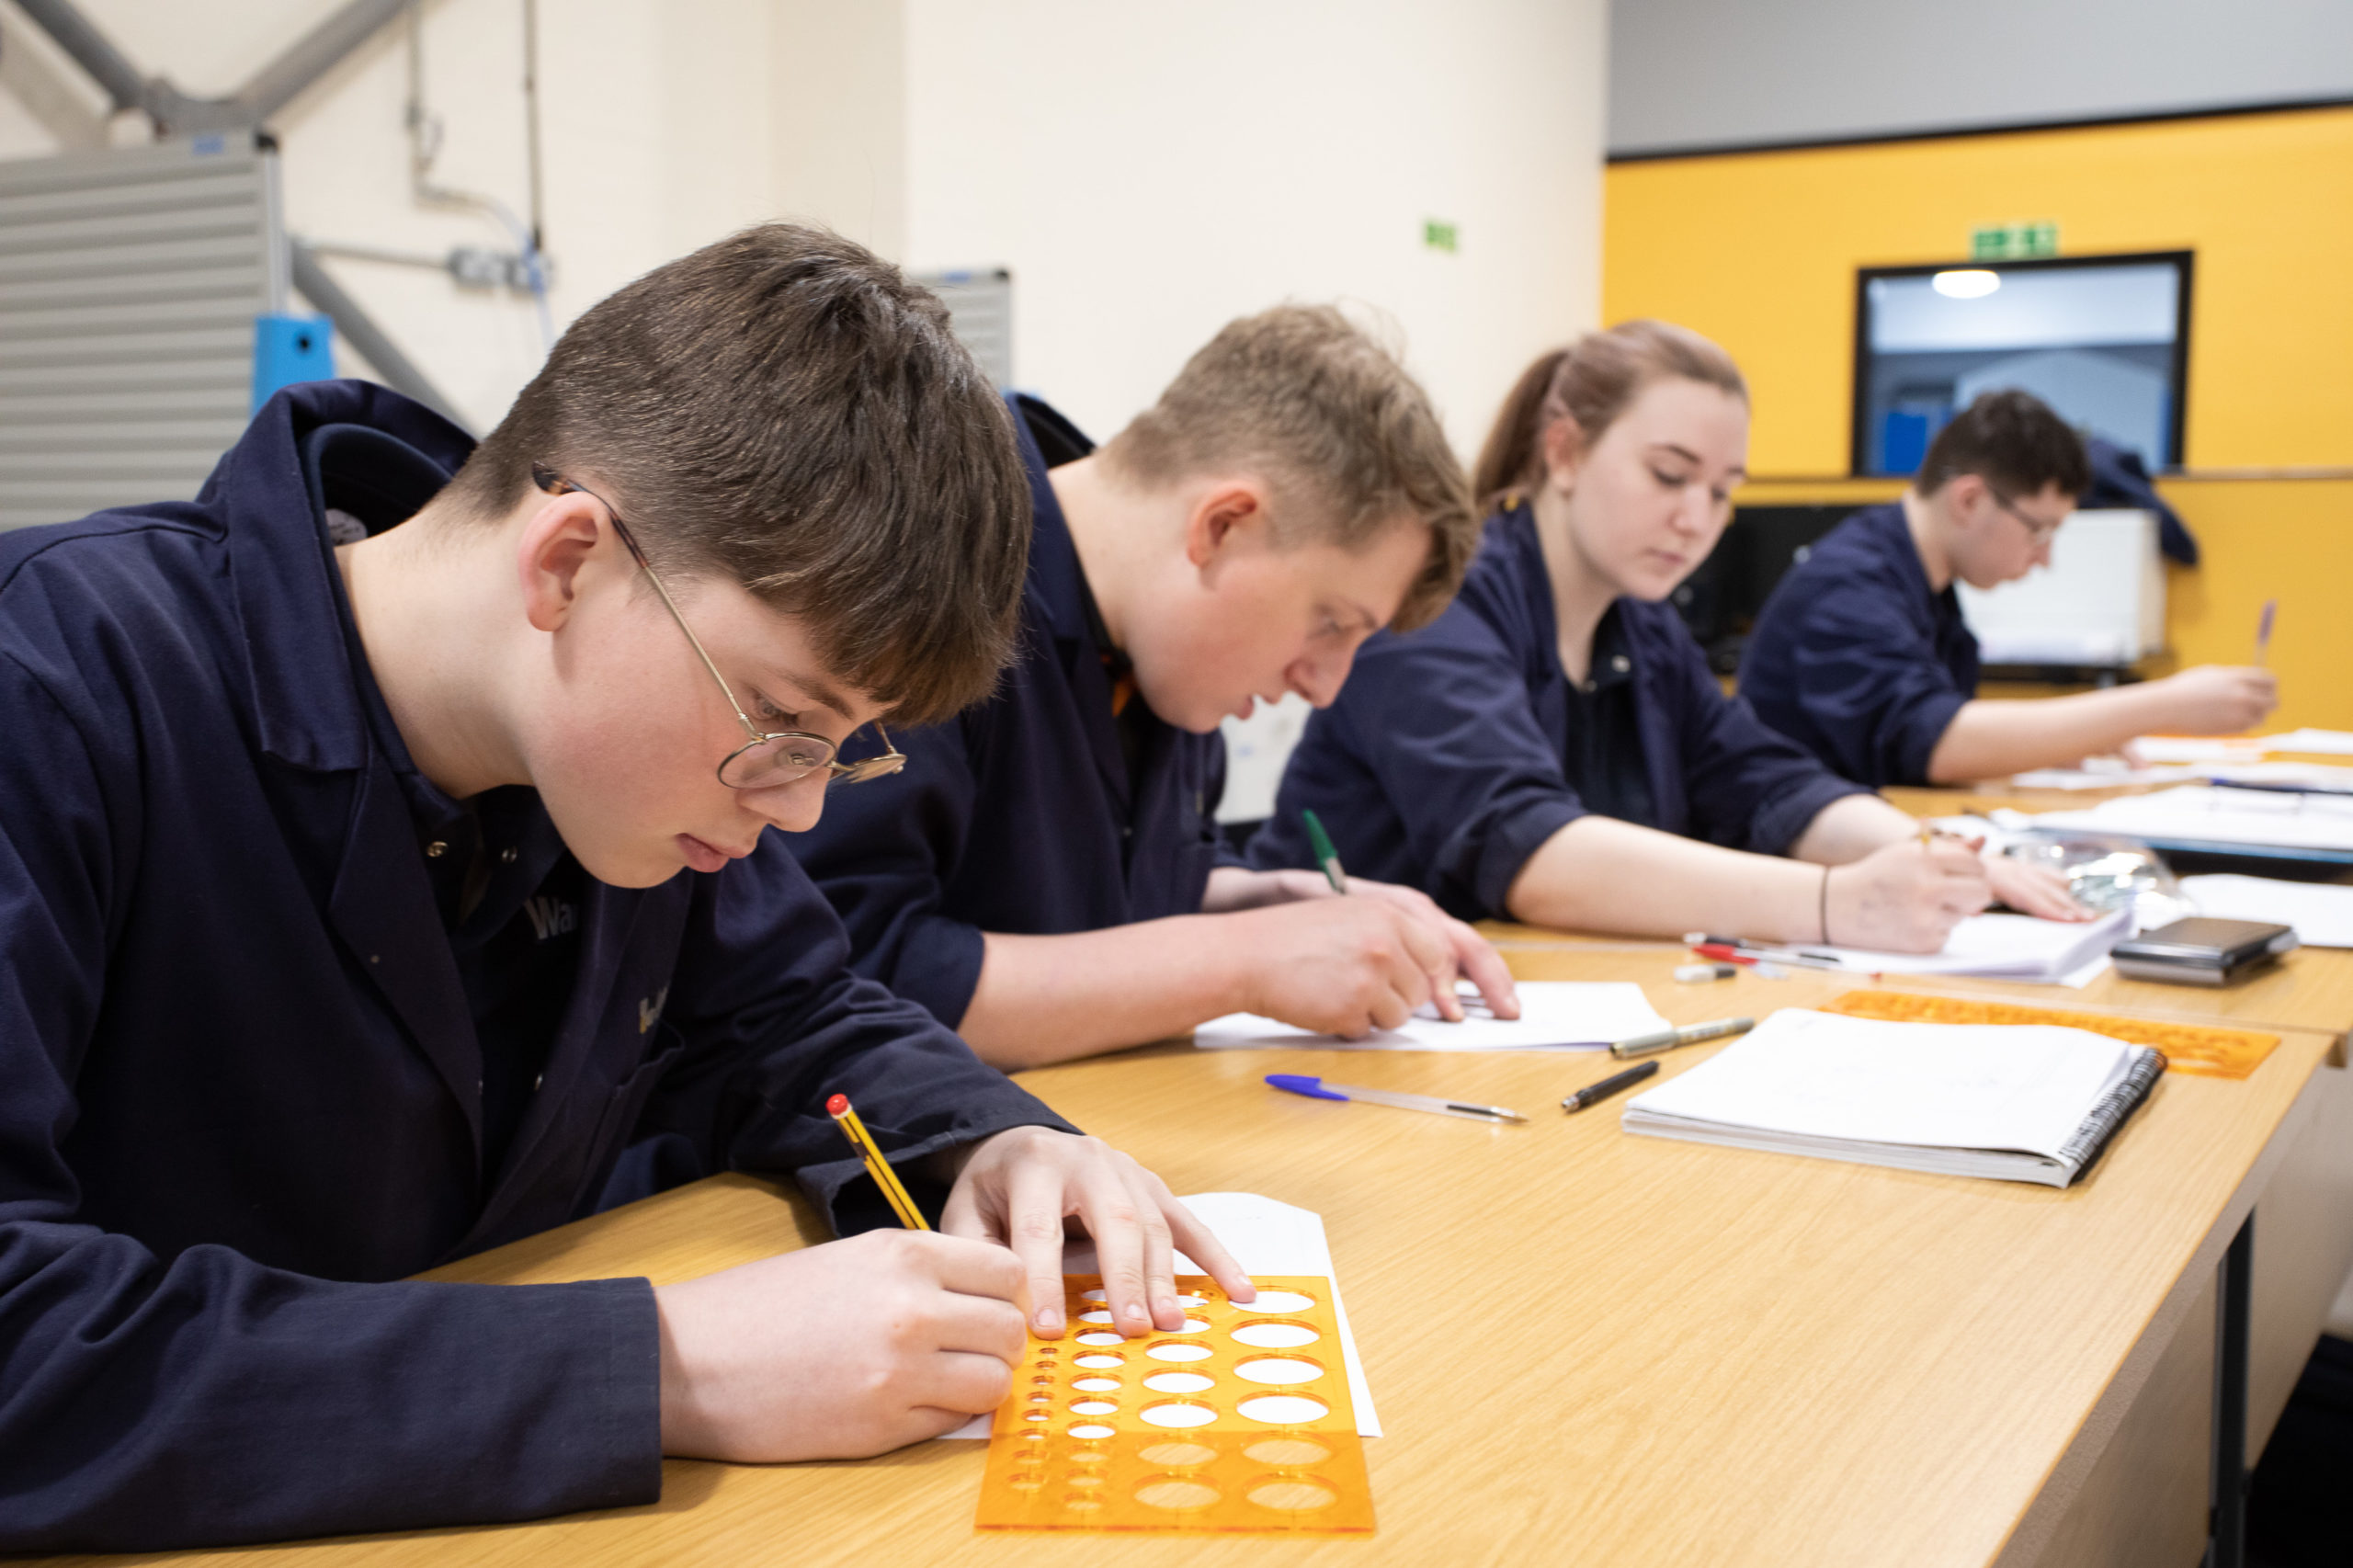 Product design & development apprentices technical drawing